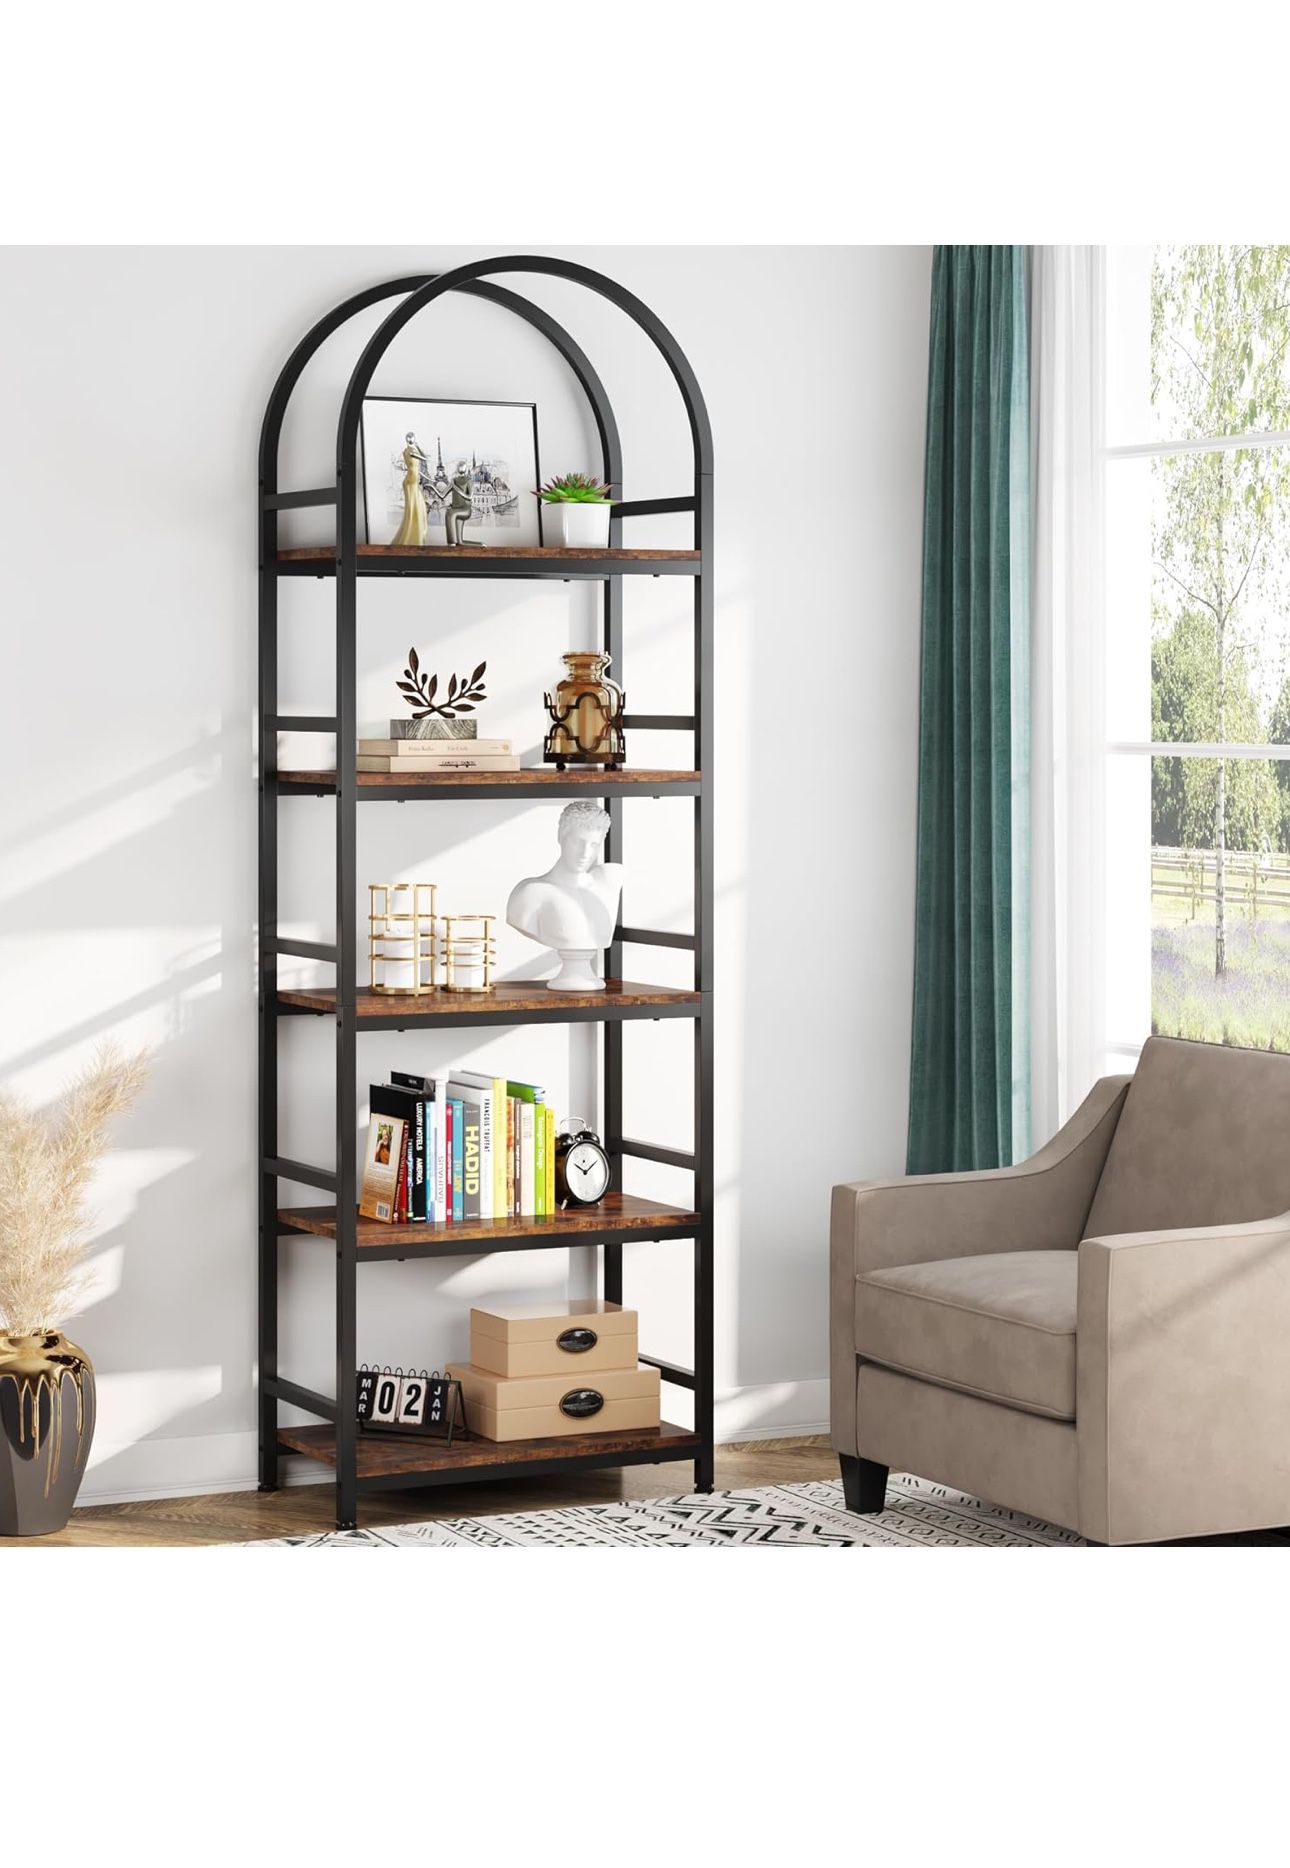 Tribesigns 5-Tier Open Bookshelf, 74.4" Wood Bookcase Storage Shelves with Metal Frame, Freestanding Display Rack Tall Shelving Unit for Office, Bedro